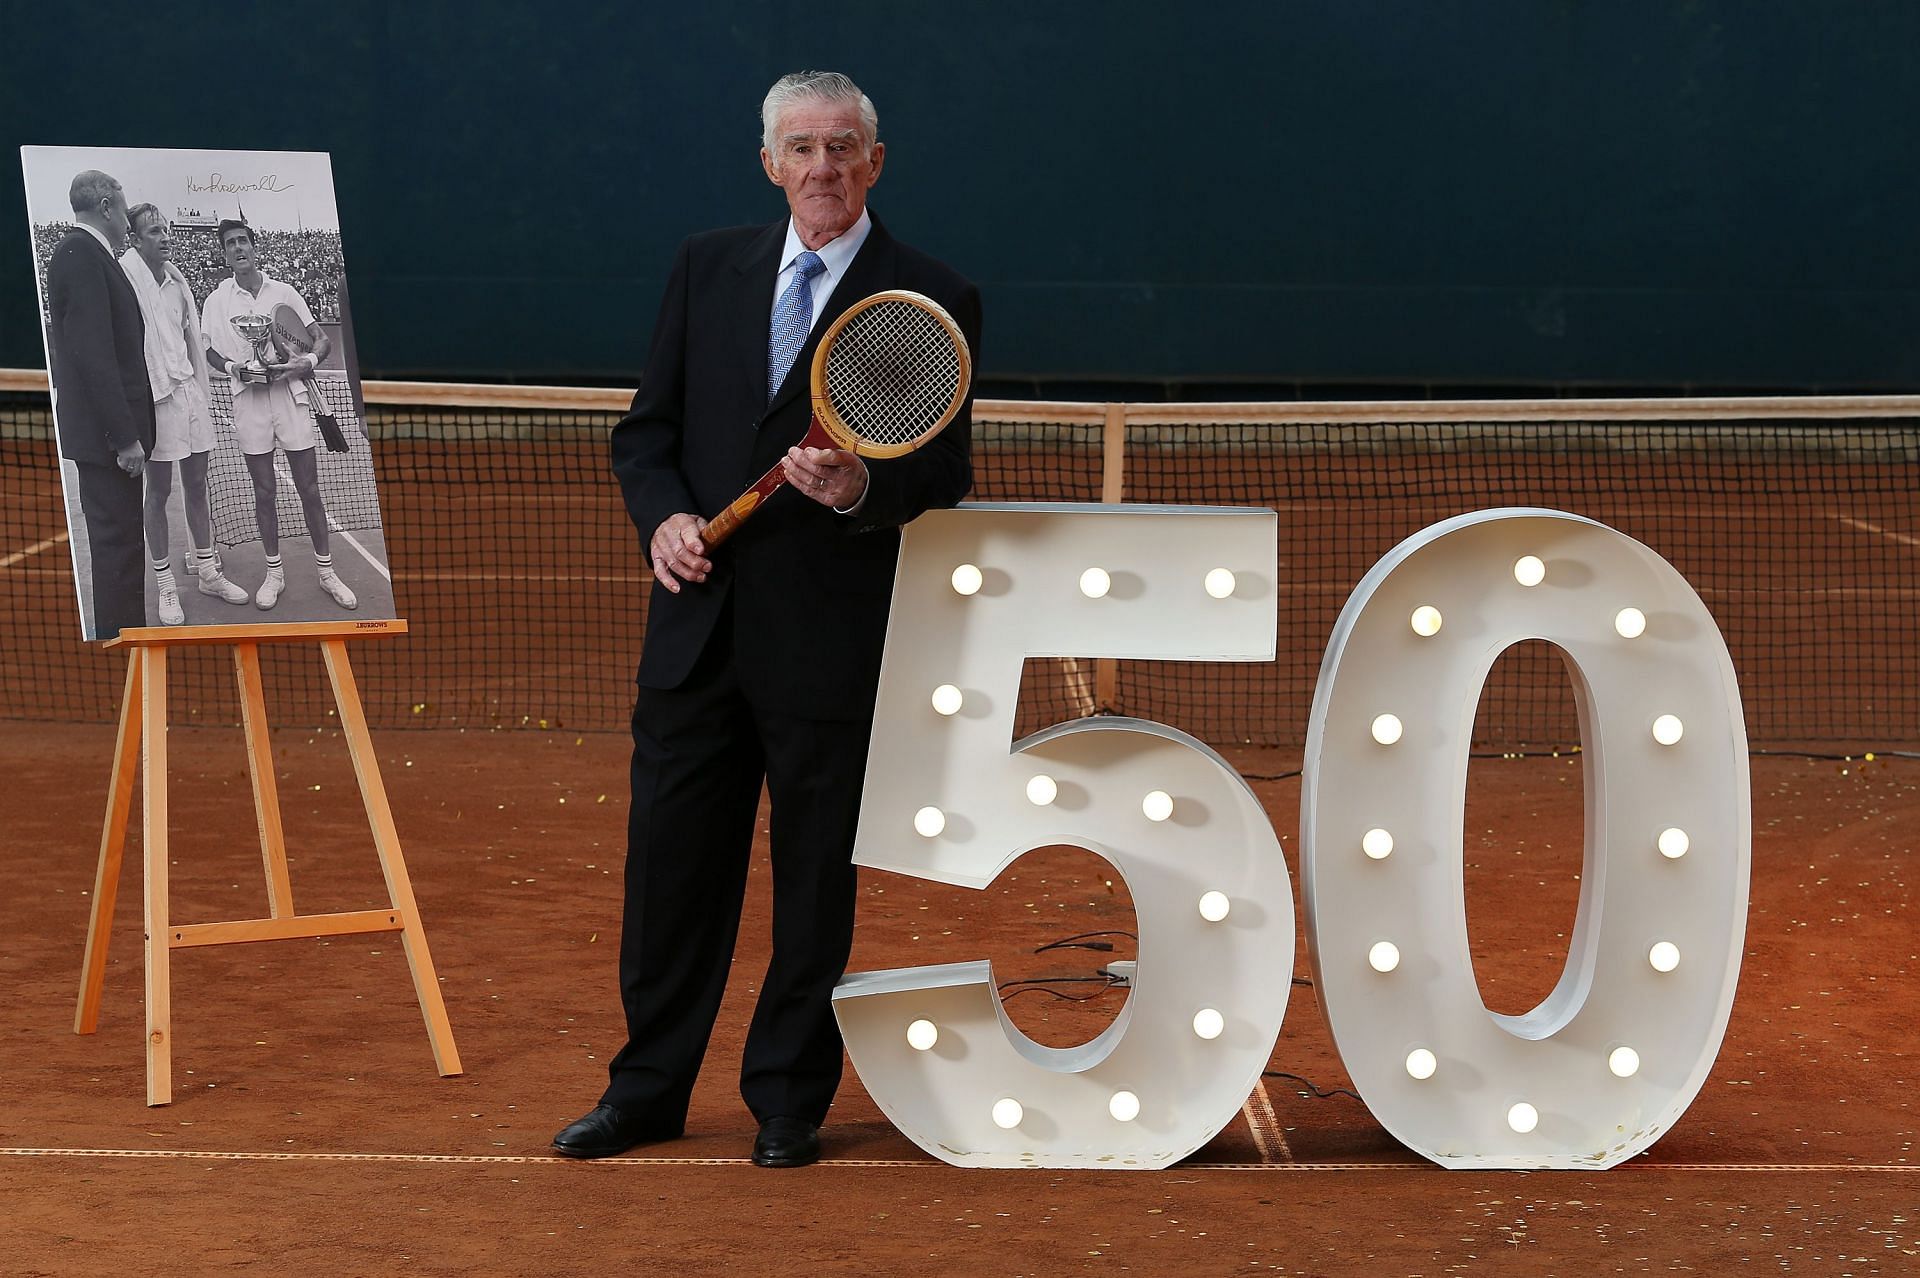 Ken Rosewall won the first French Open title in the Open Era.